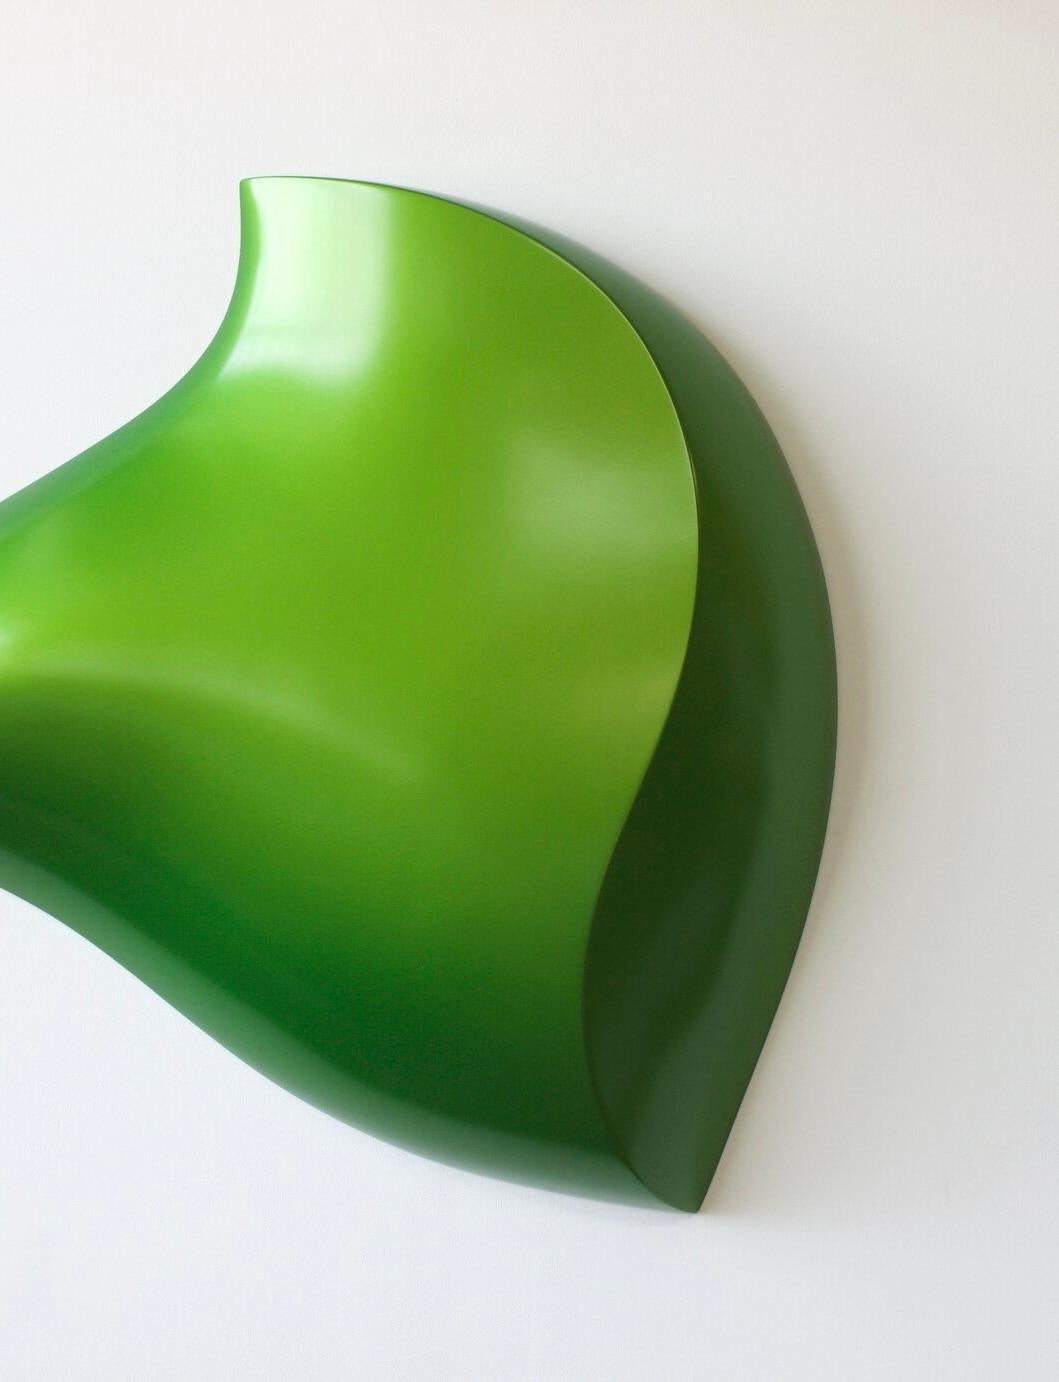 This beautiful green minimalist sculptural work explores the evocative power monochrome color. Originally working as a painter, Thompson focused on Minimalism. In his sculptural work, monochrome serves as format for color exploration.

The actual